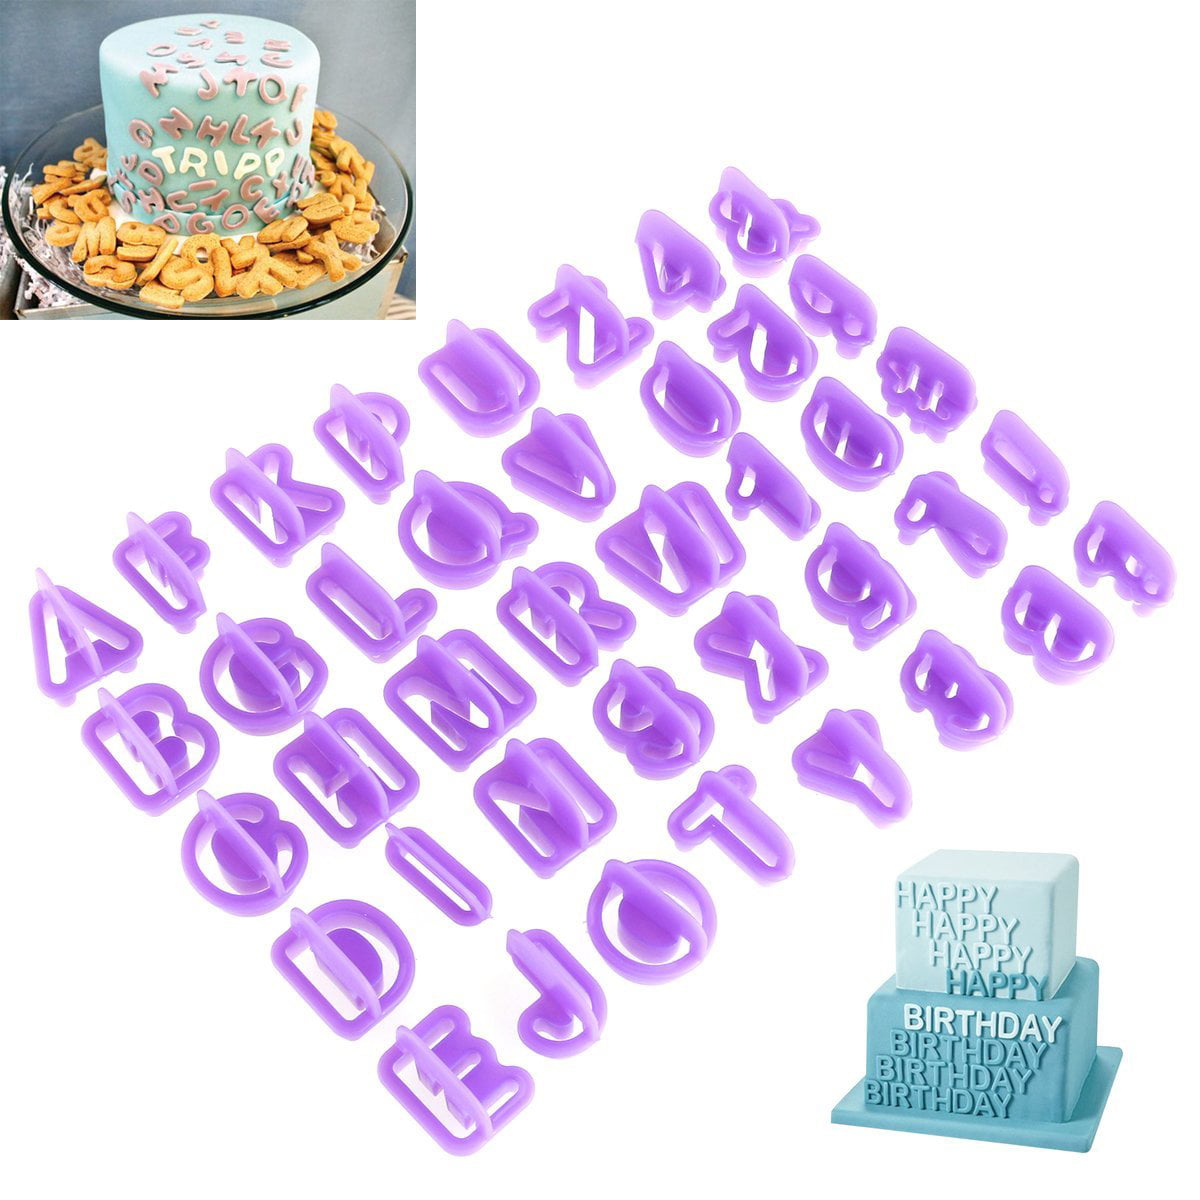 Icing Cutter Mold Character Fondant Cake Decorating Alphabet Number Letter